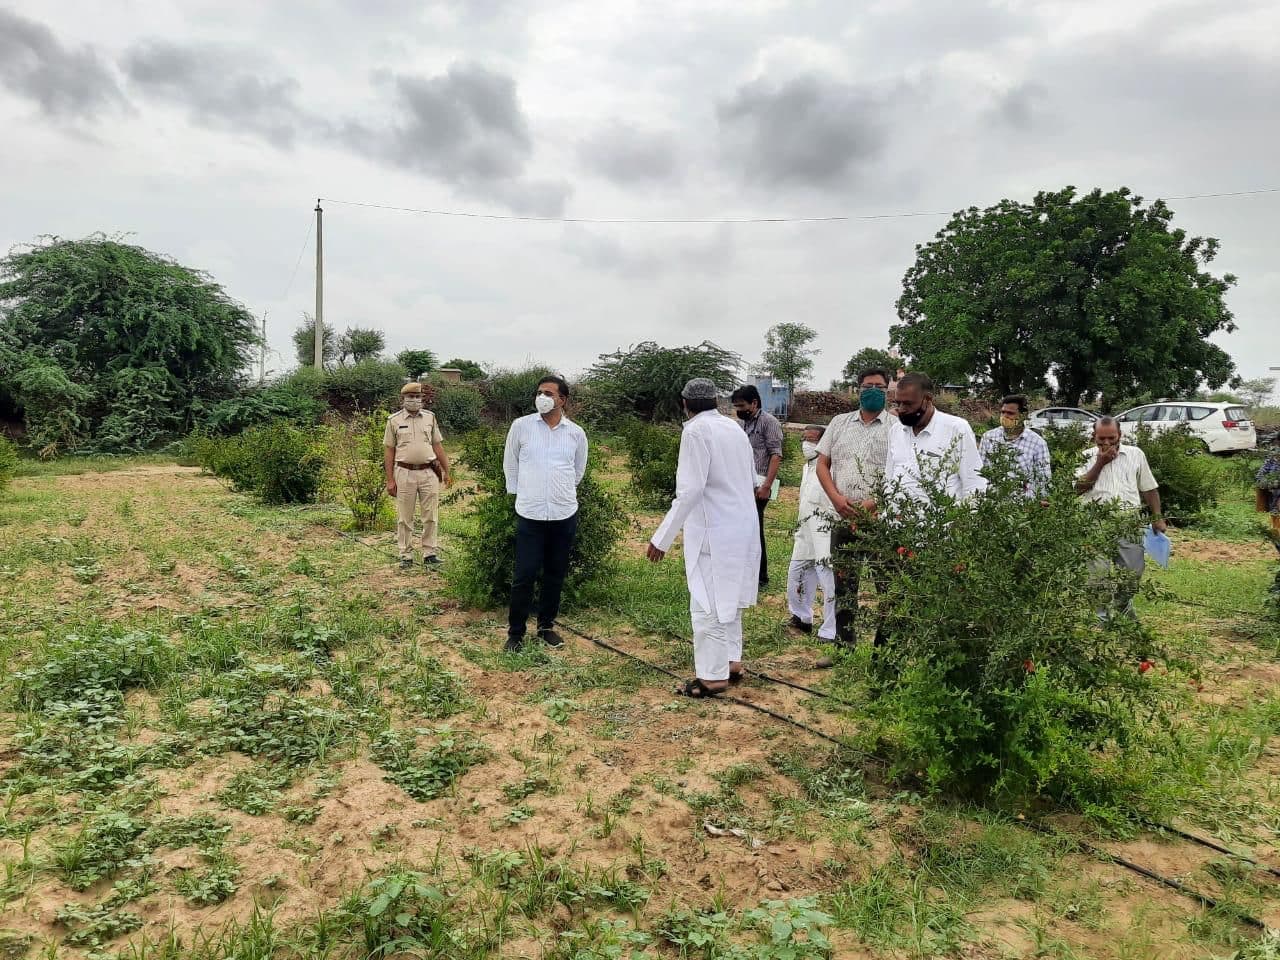 Collector Soni reached Manu village with a team of agricultural officers